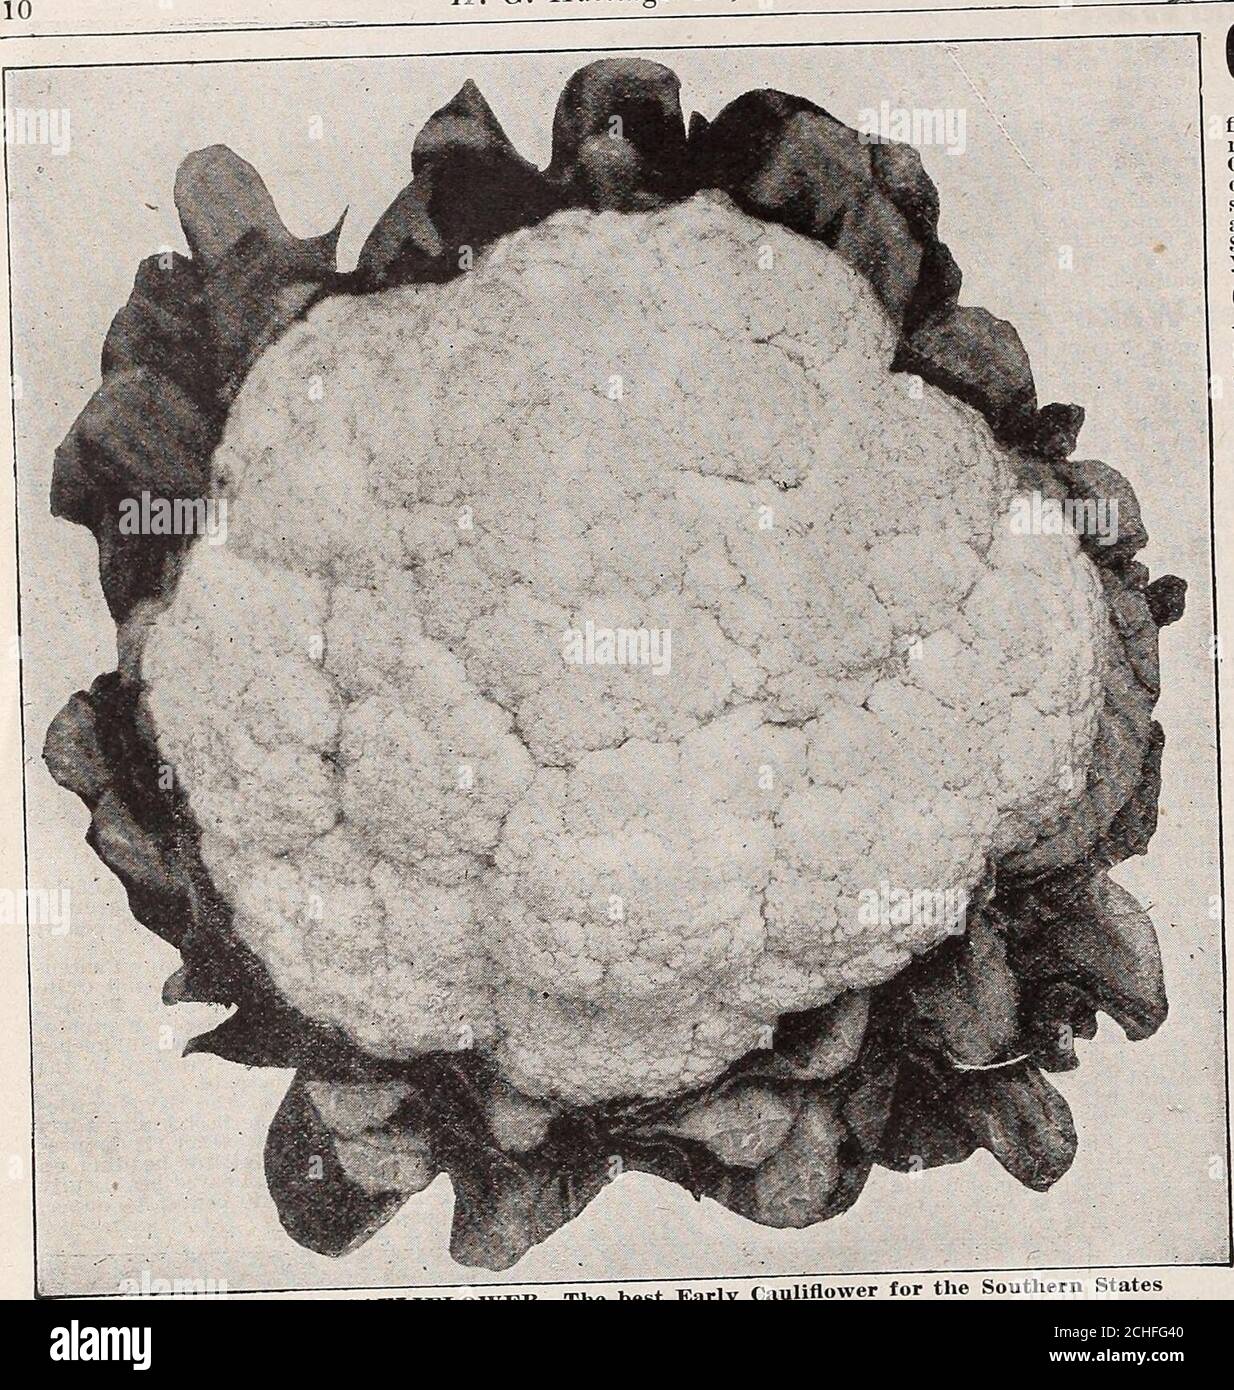 Catalog . Pe Tsai—The Finest in Flavor and Quality of All Chinese Cabbages H.  6. Hastings Co., Seedsmen, Atlanta, Georgia. COLLARDS A^.^M|;FMf Southern  people like them The col- lard is an